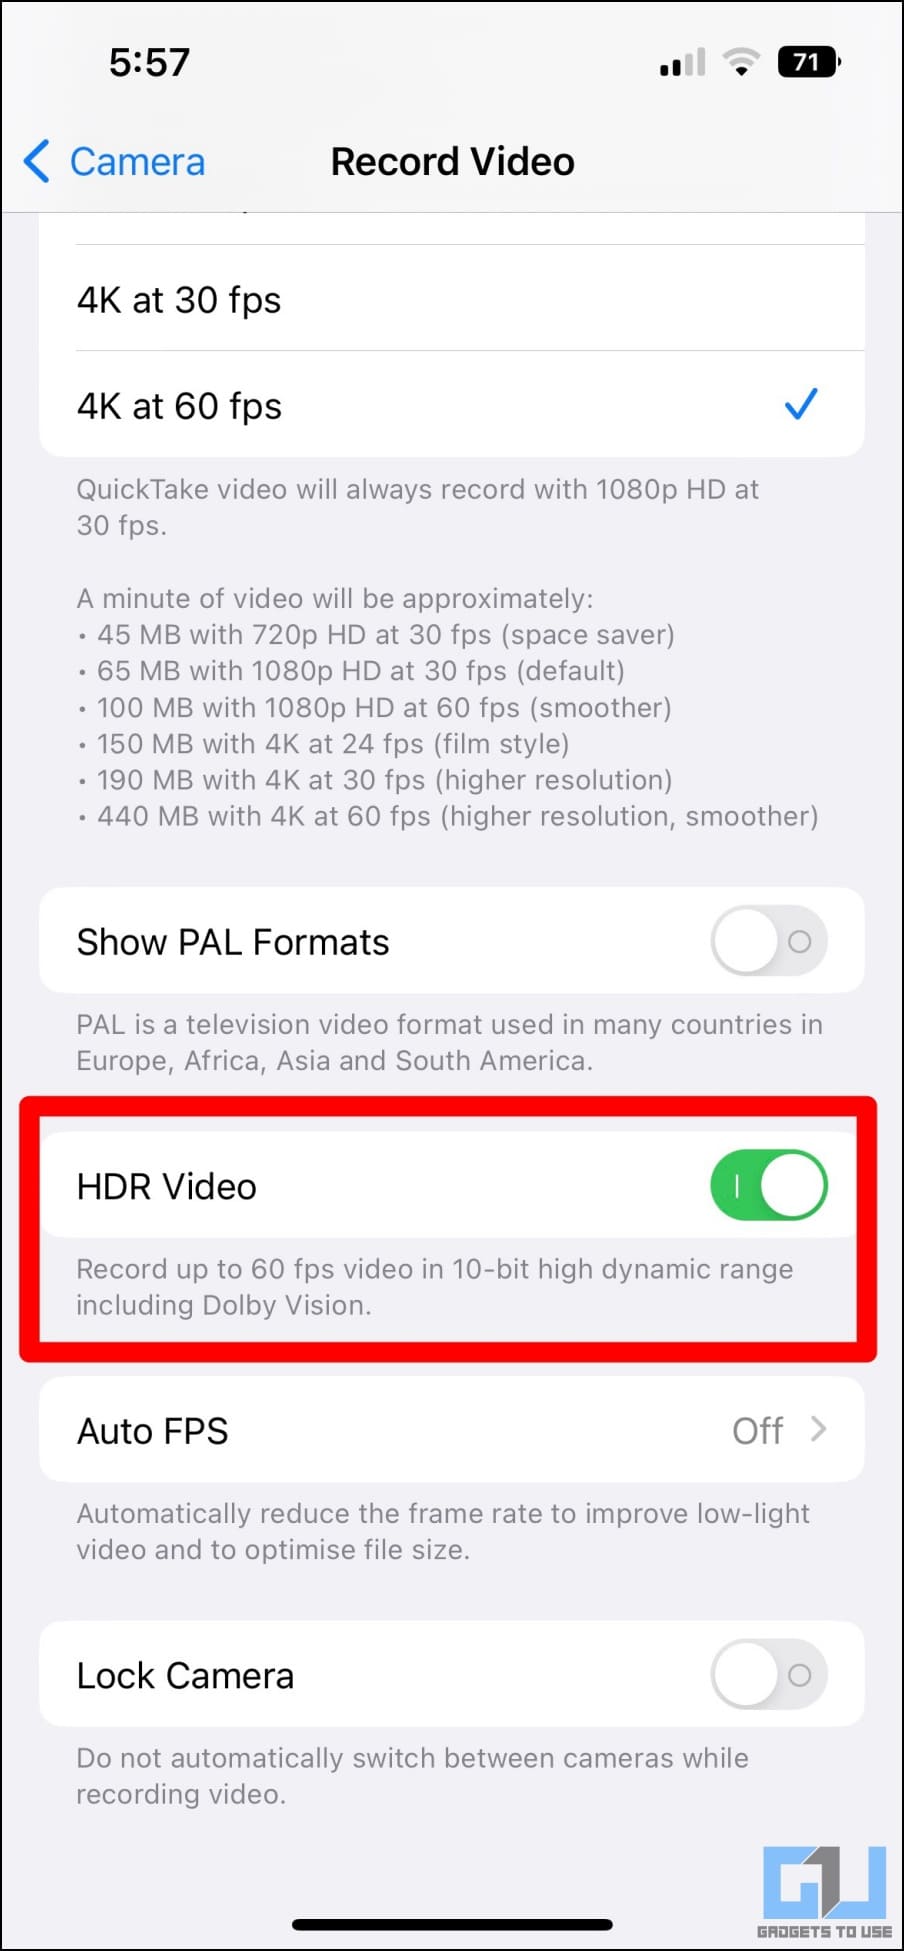 Record Reels Videos in 4K HDR